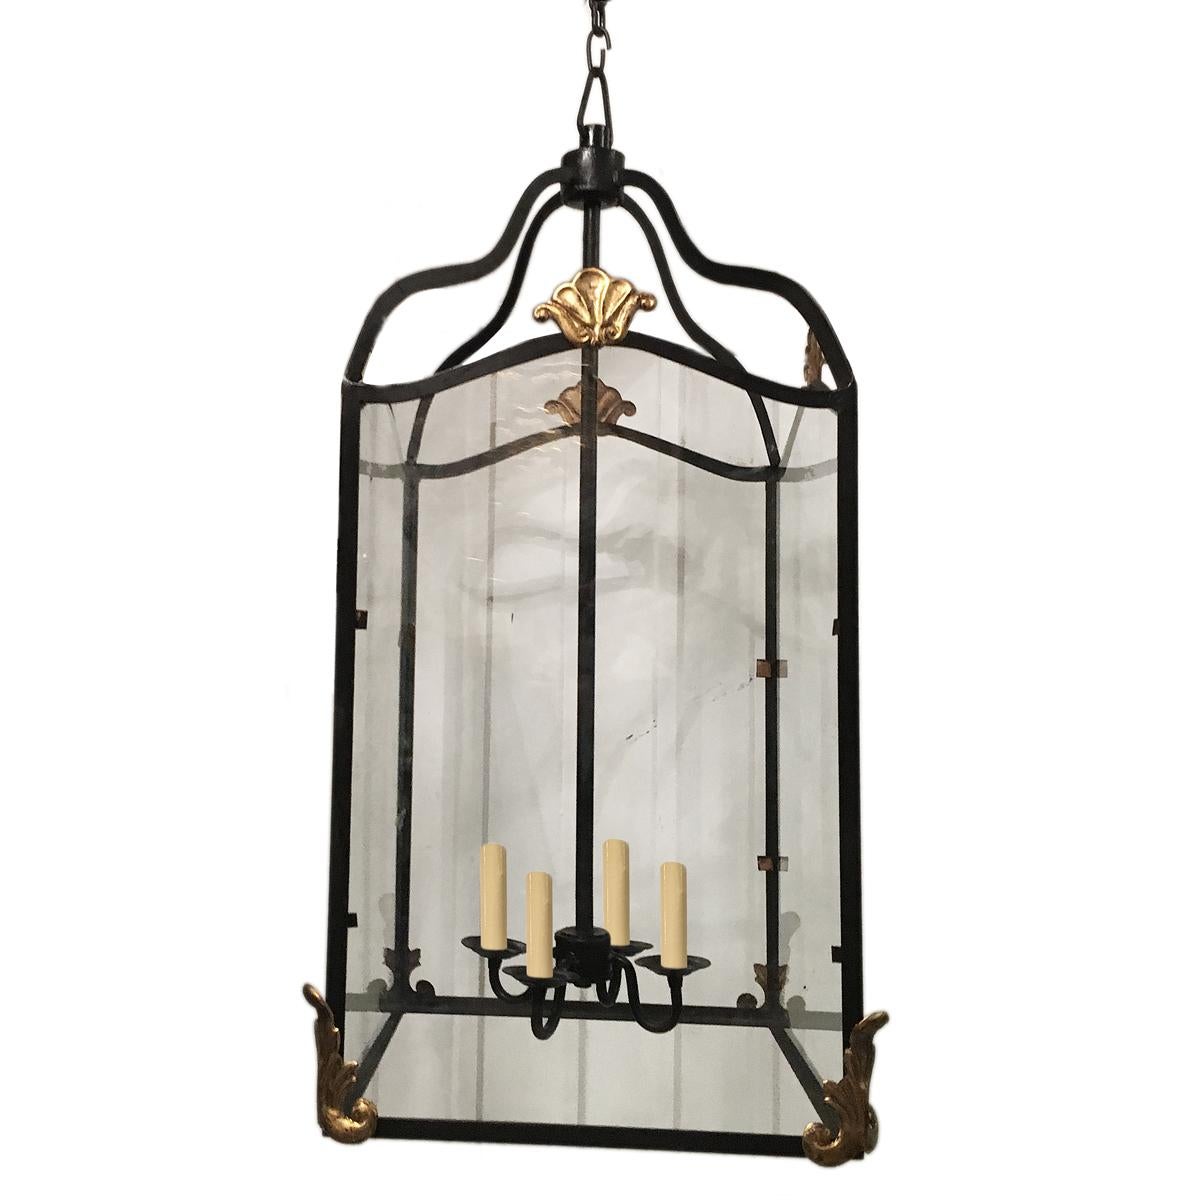 A circa 1950s French wrought iron lantern with gilt details. 5 interior lights.

Measurements:
Height 36